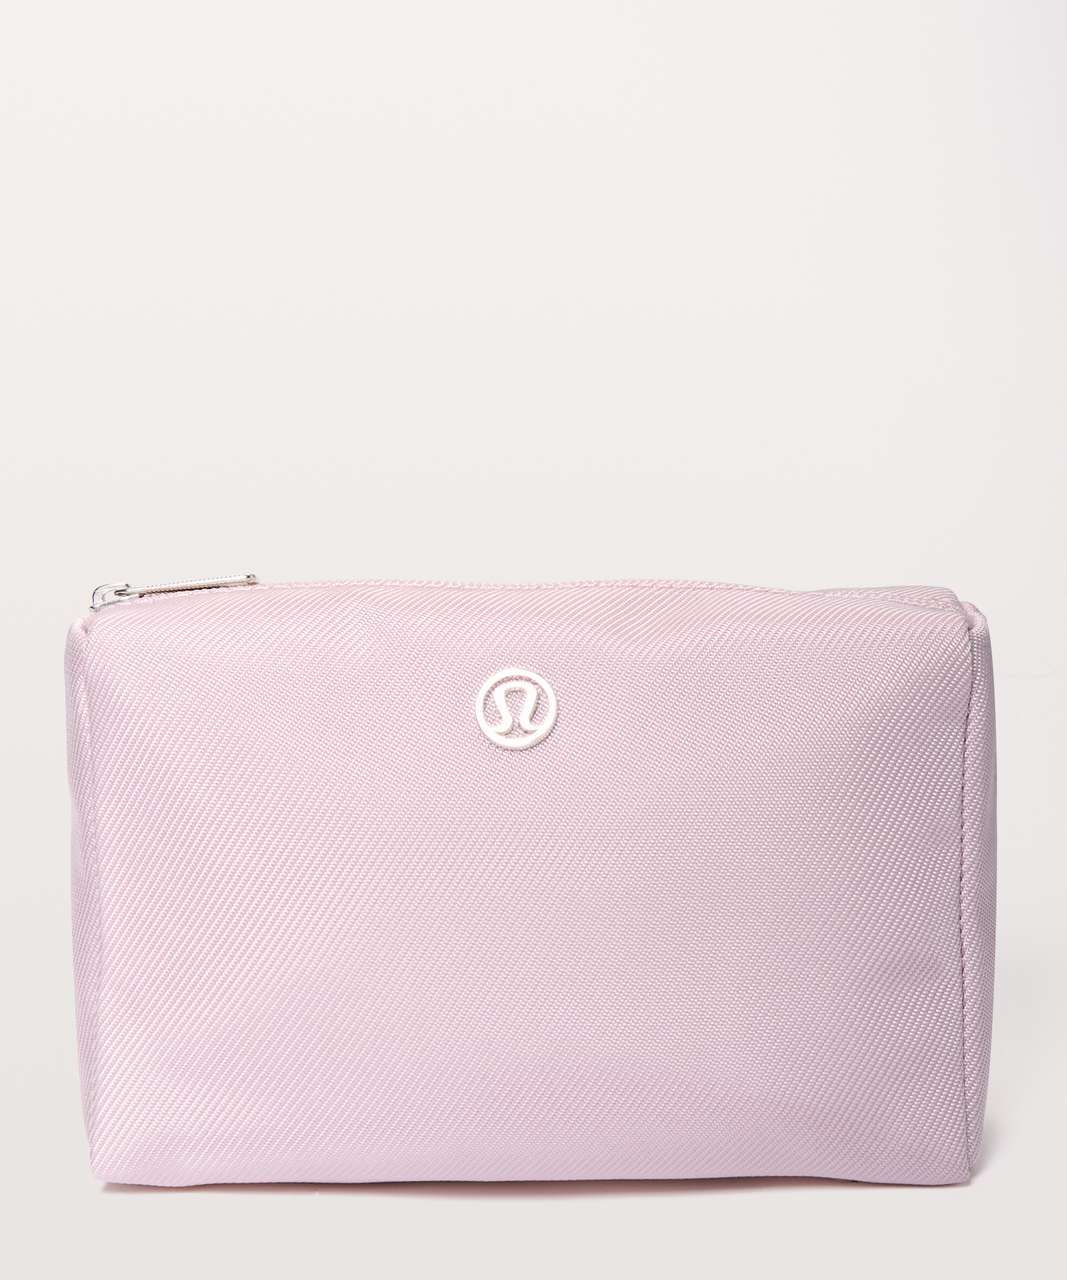 Lululemon All Your Small Things Pouch Mini - Misty Pink